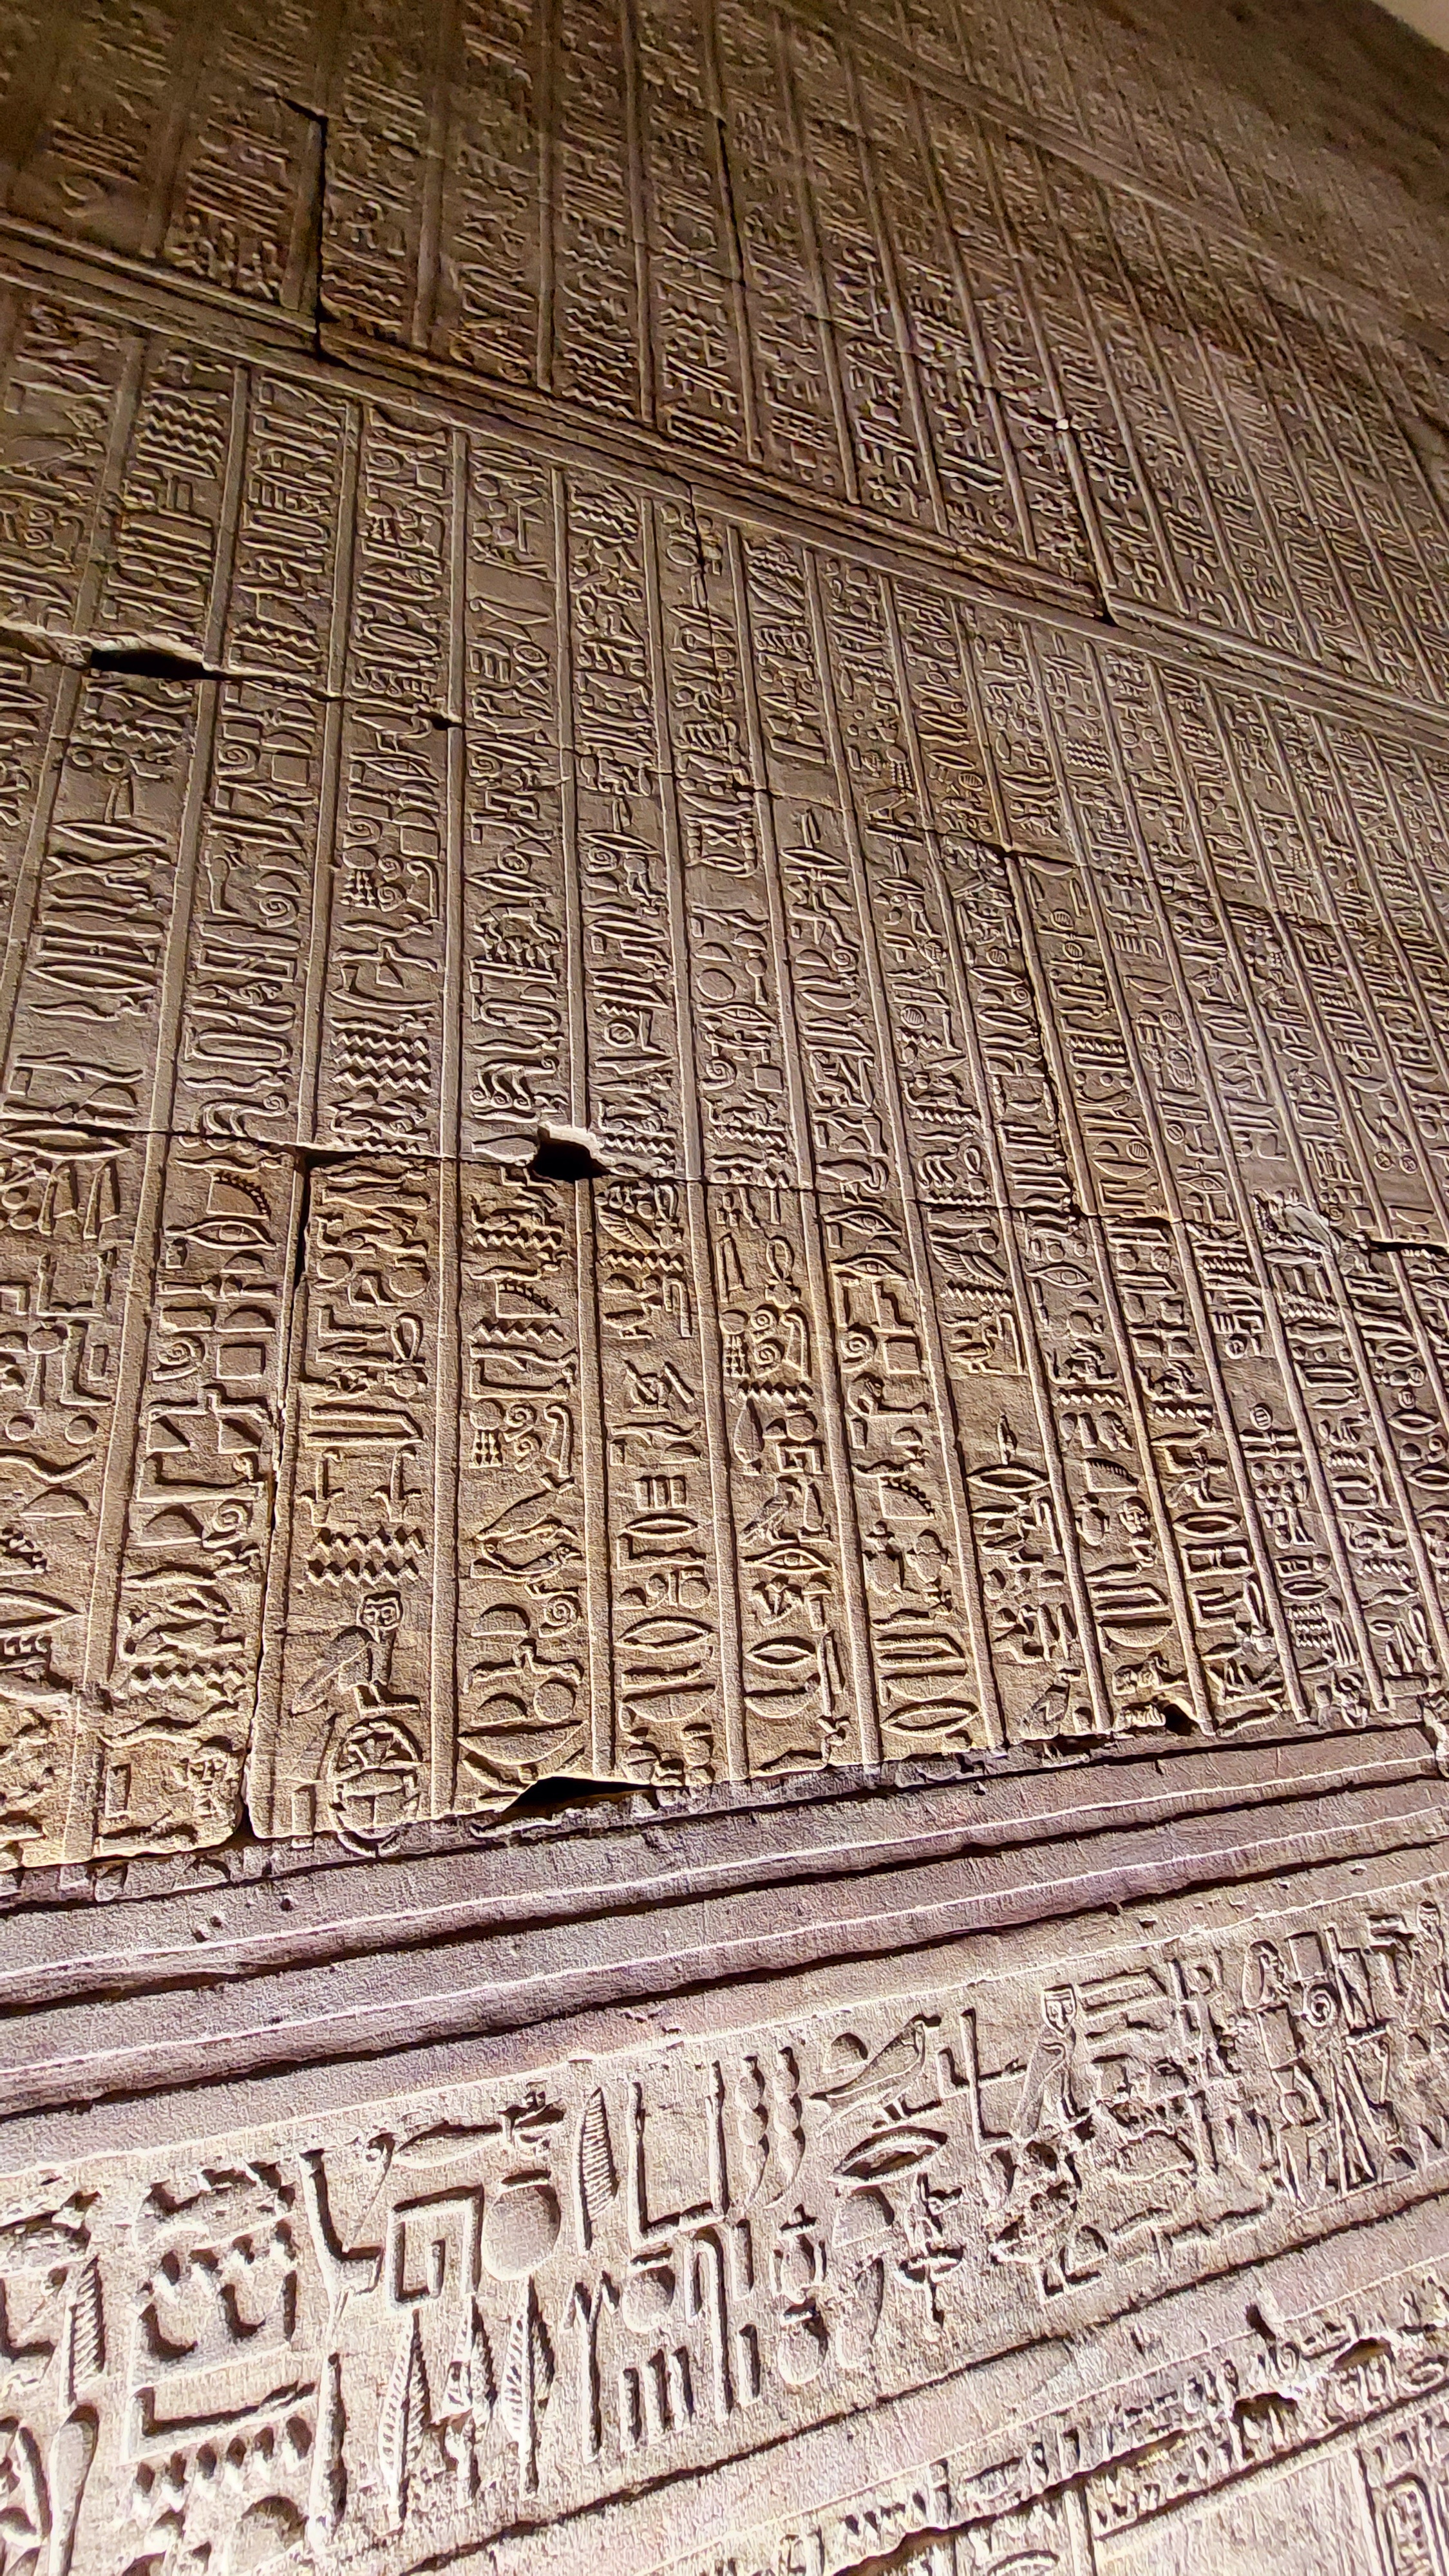 Some of the hieroglyphics still preserve the ancient colours